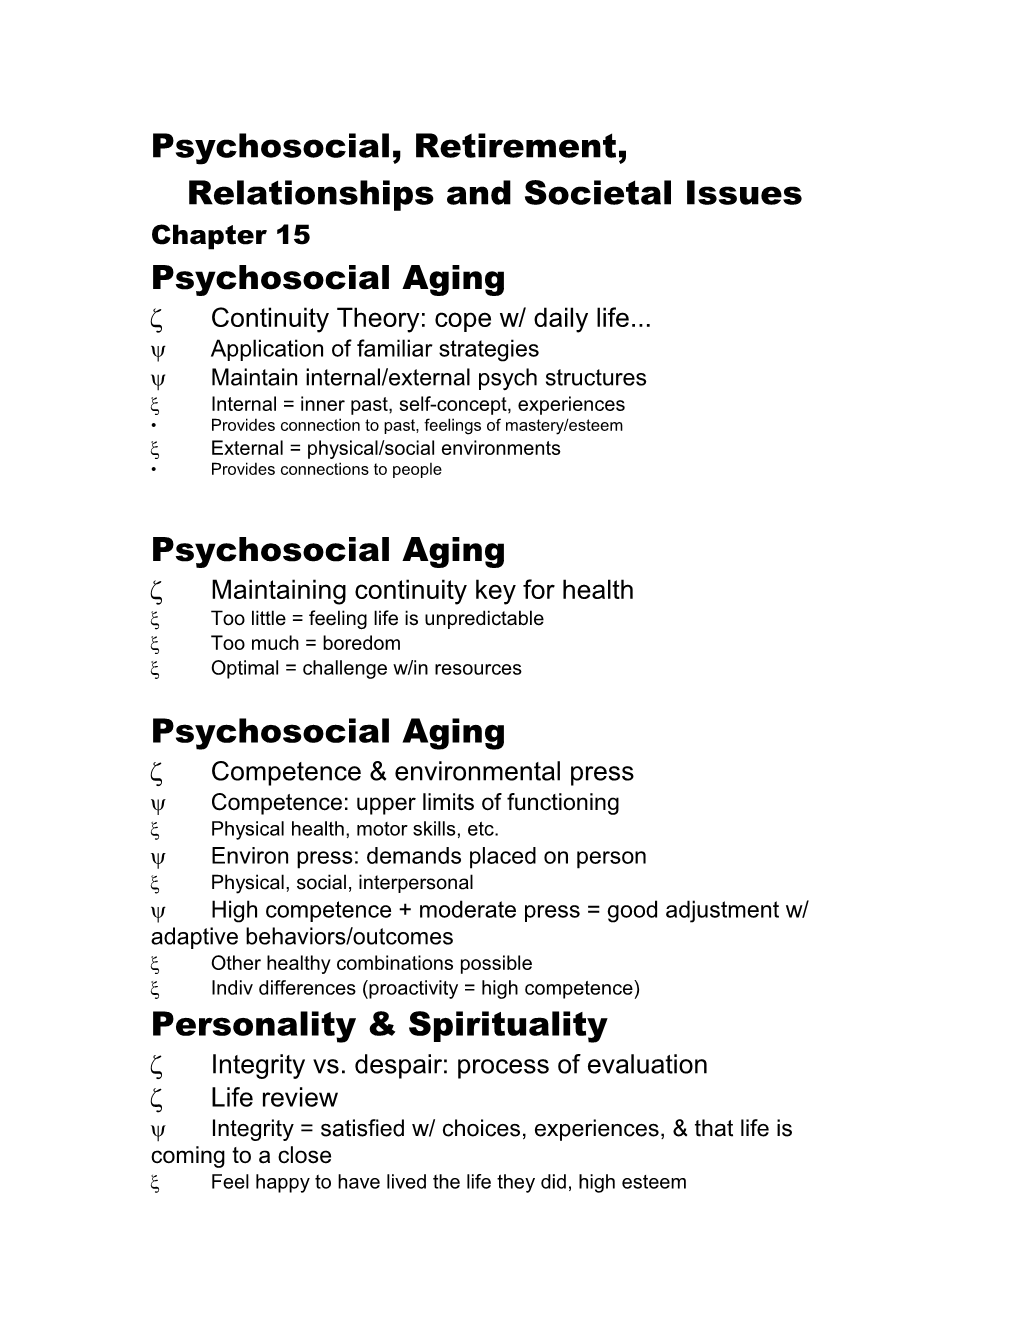 Psychosocial, Retirement, Relationships and Societal Issues